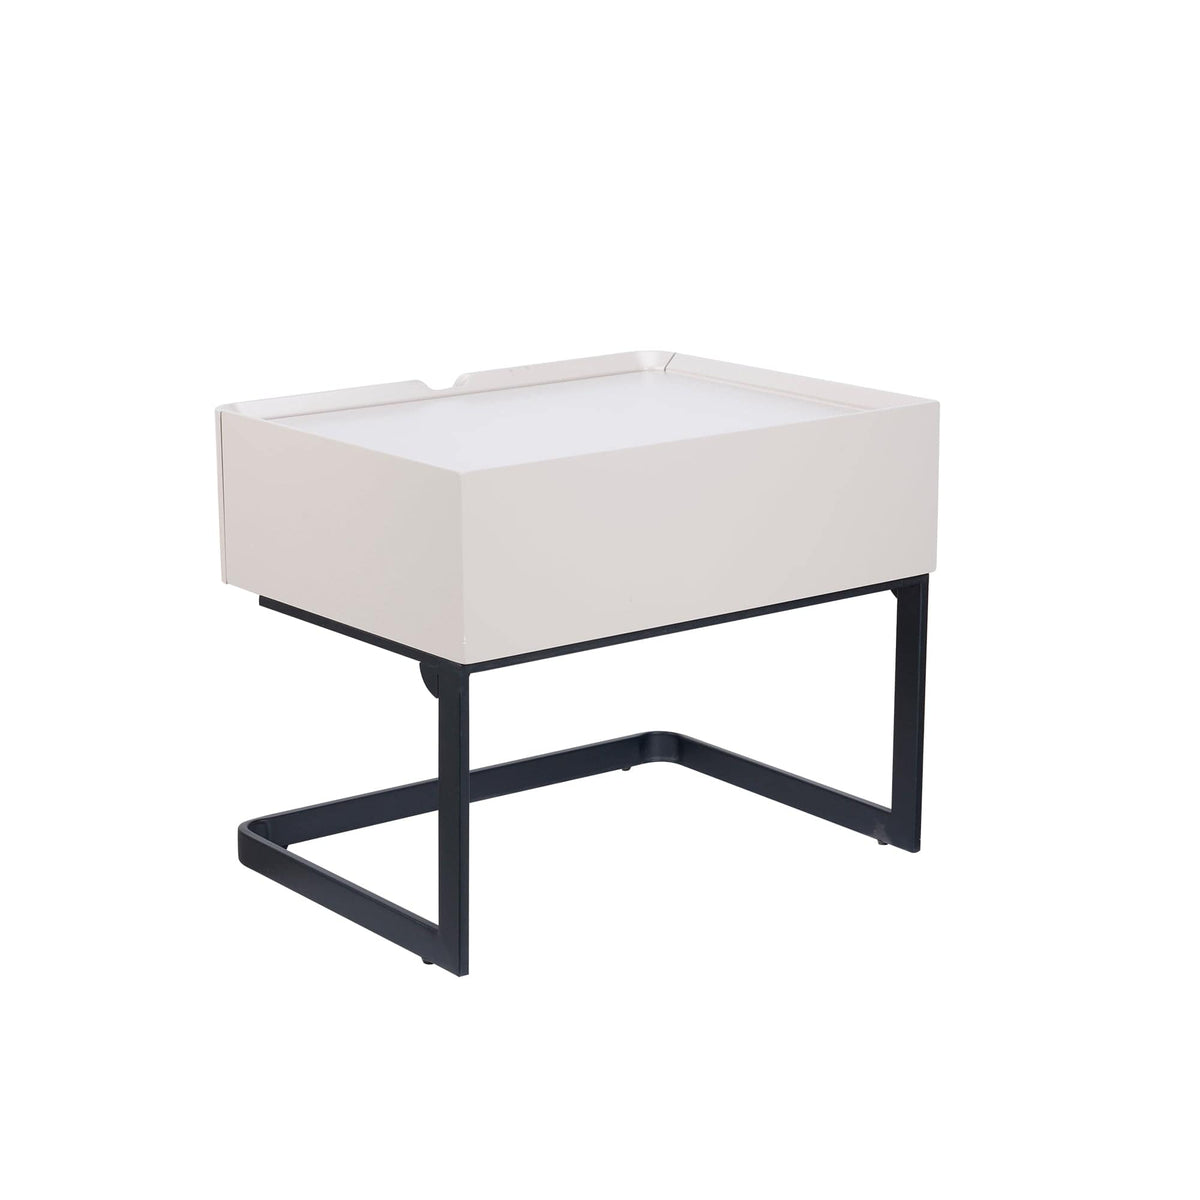 Nocturne Bedside Table/Nightstand with Drawer - MR-129 picket and rail